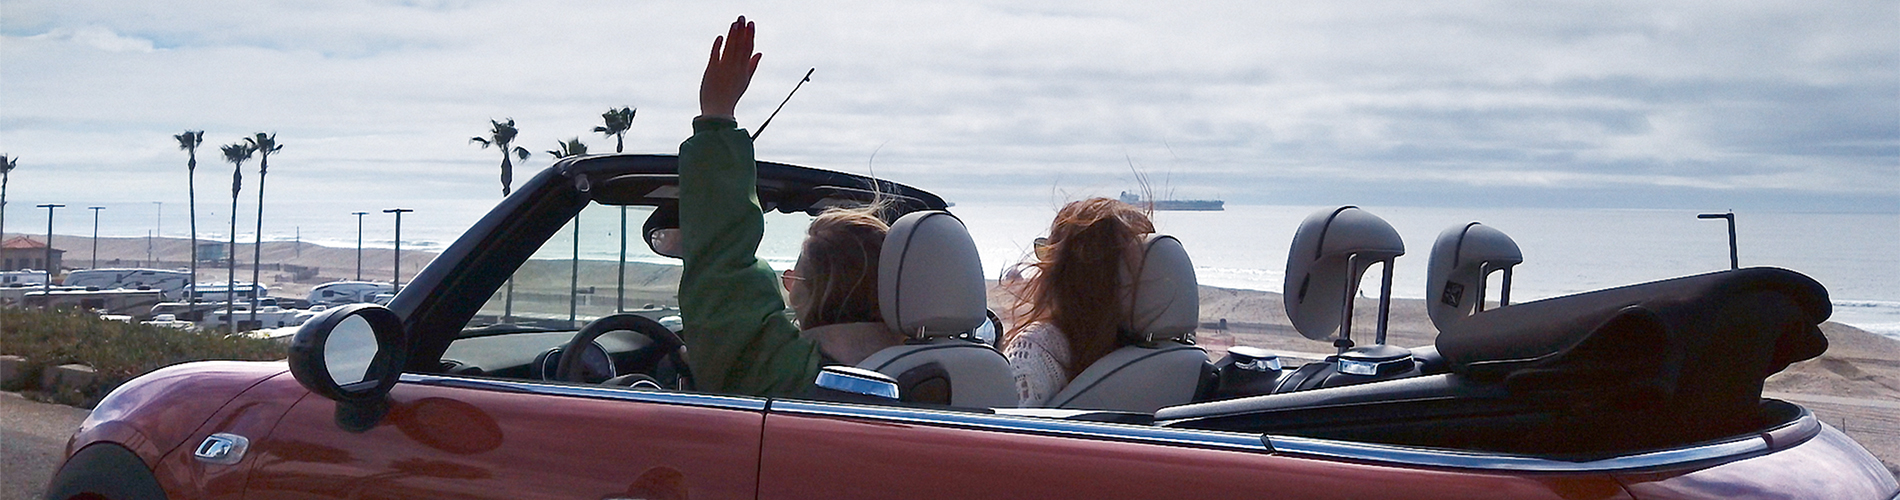 Female driver raising arm inside of a red MINI convertible with roof down near a beach.